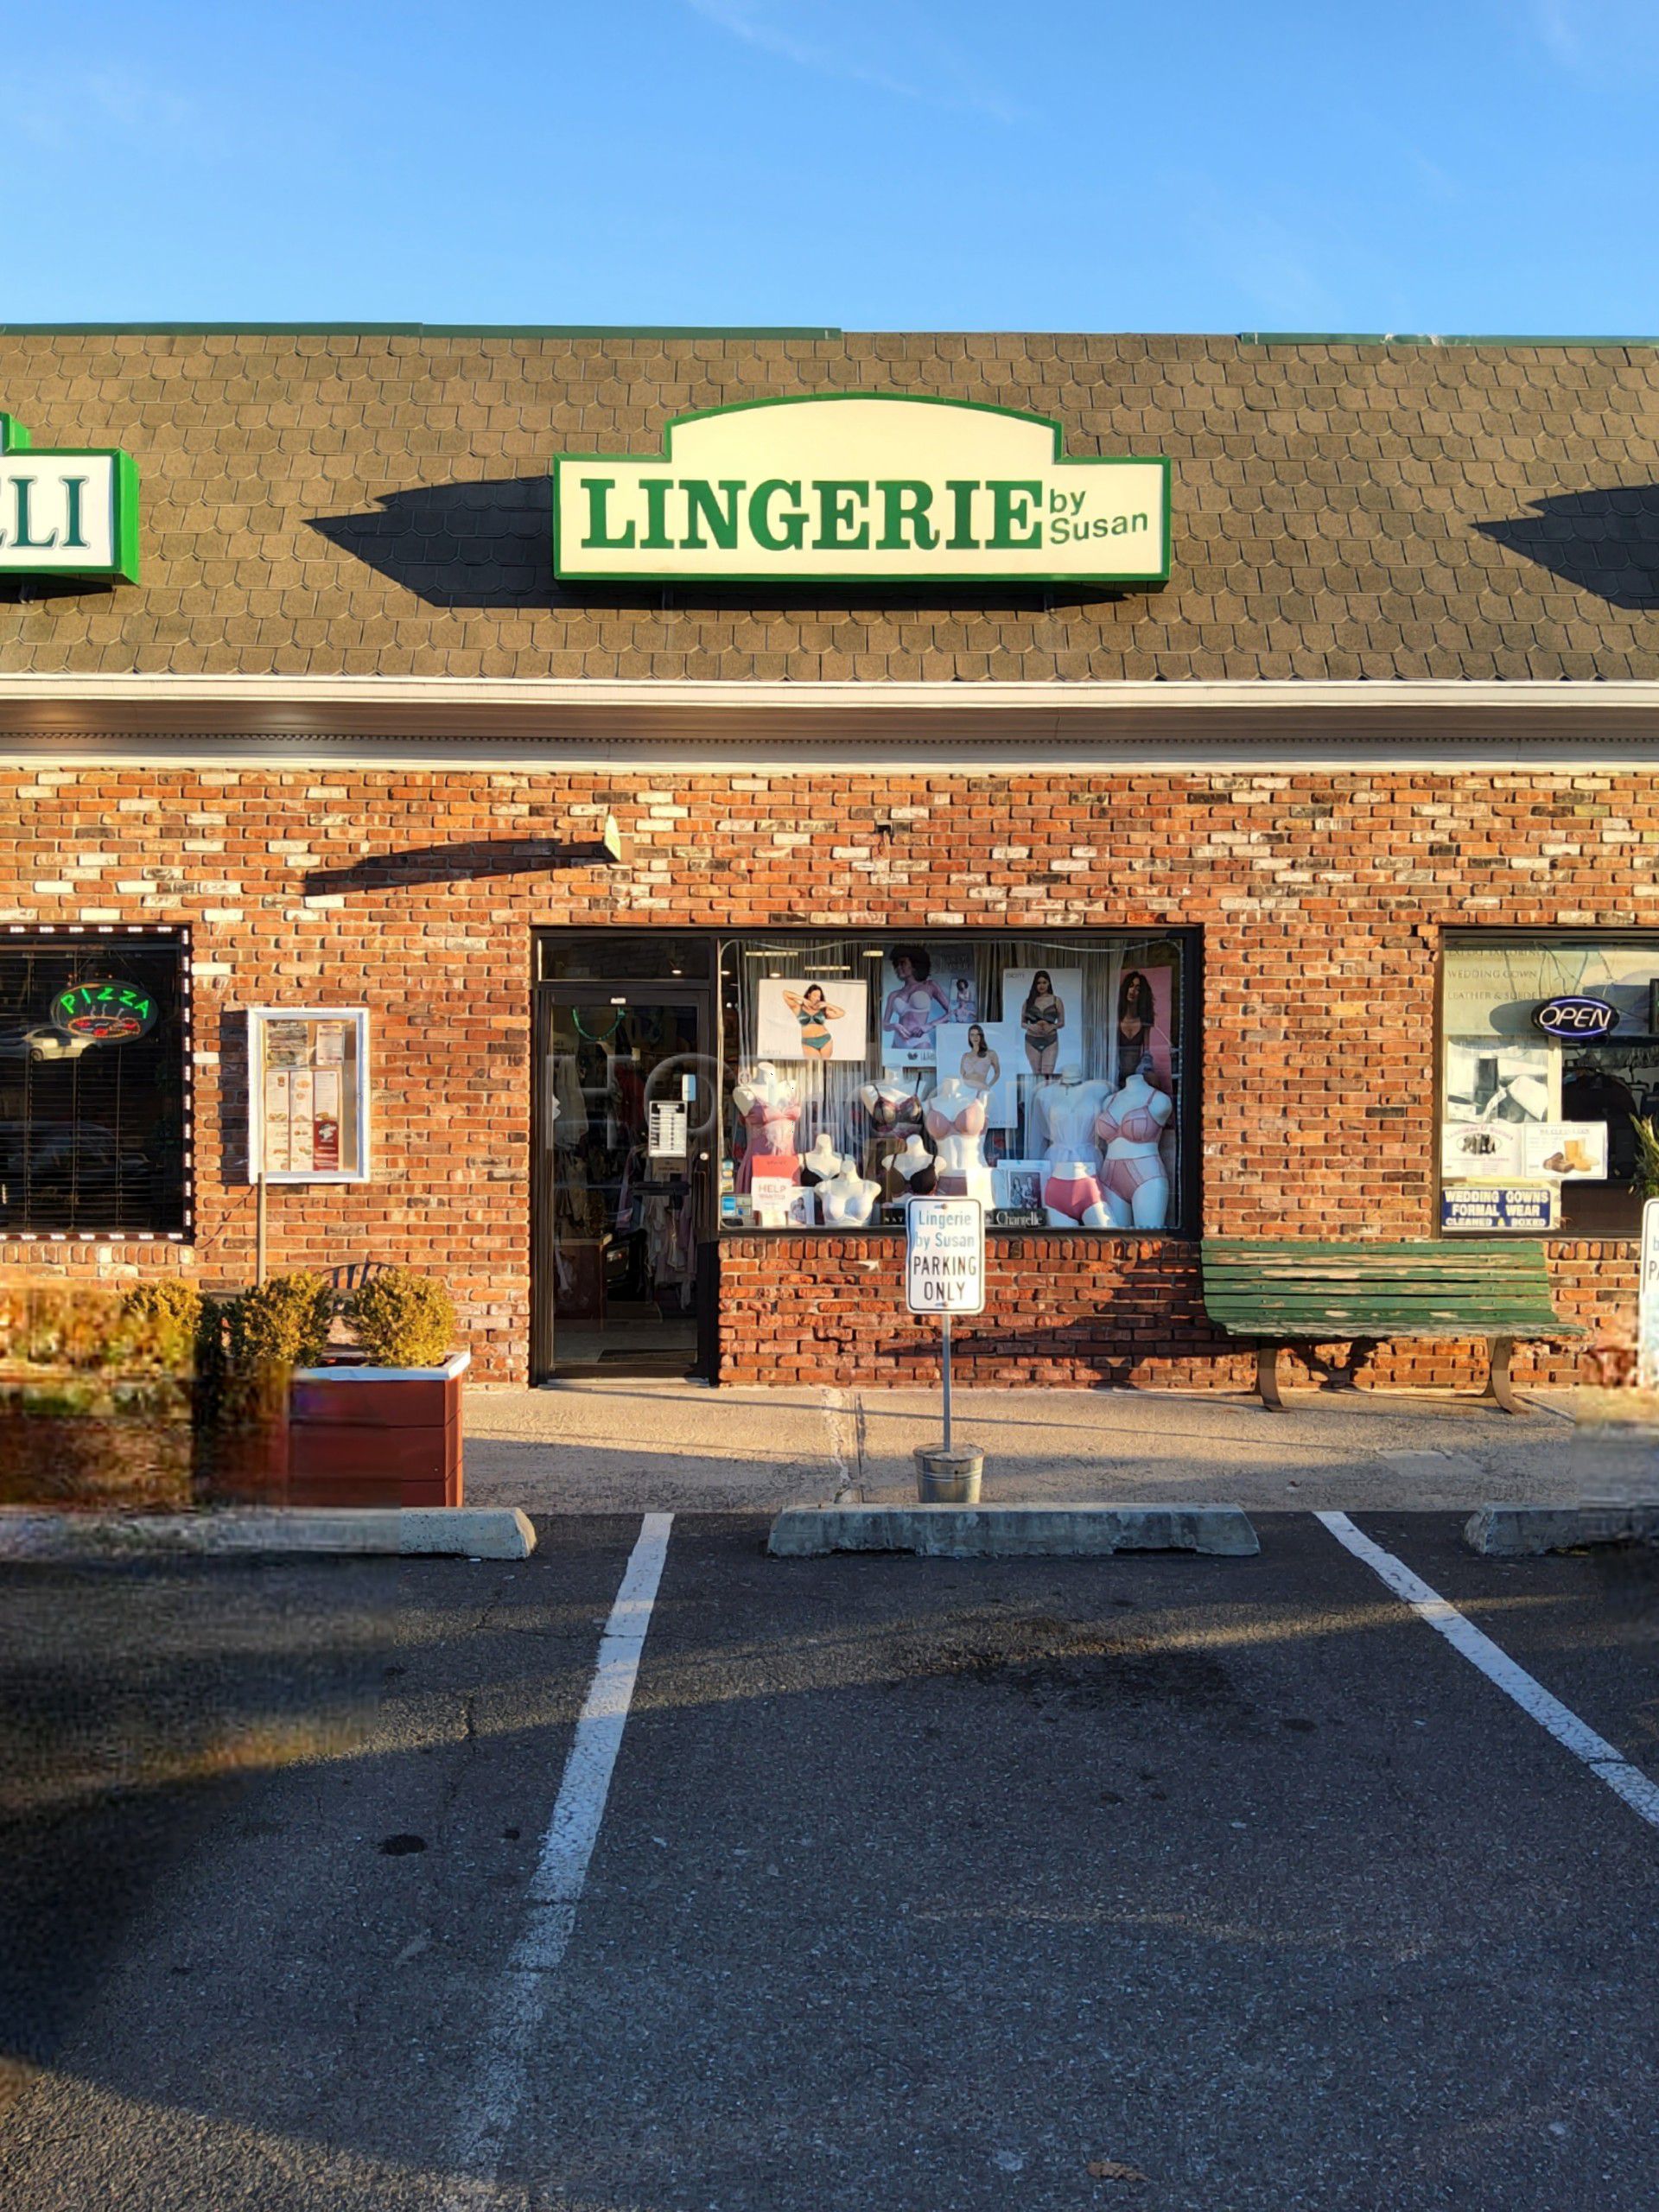 Edison, New Jersey Lingerie by Susan